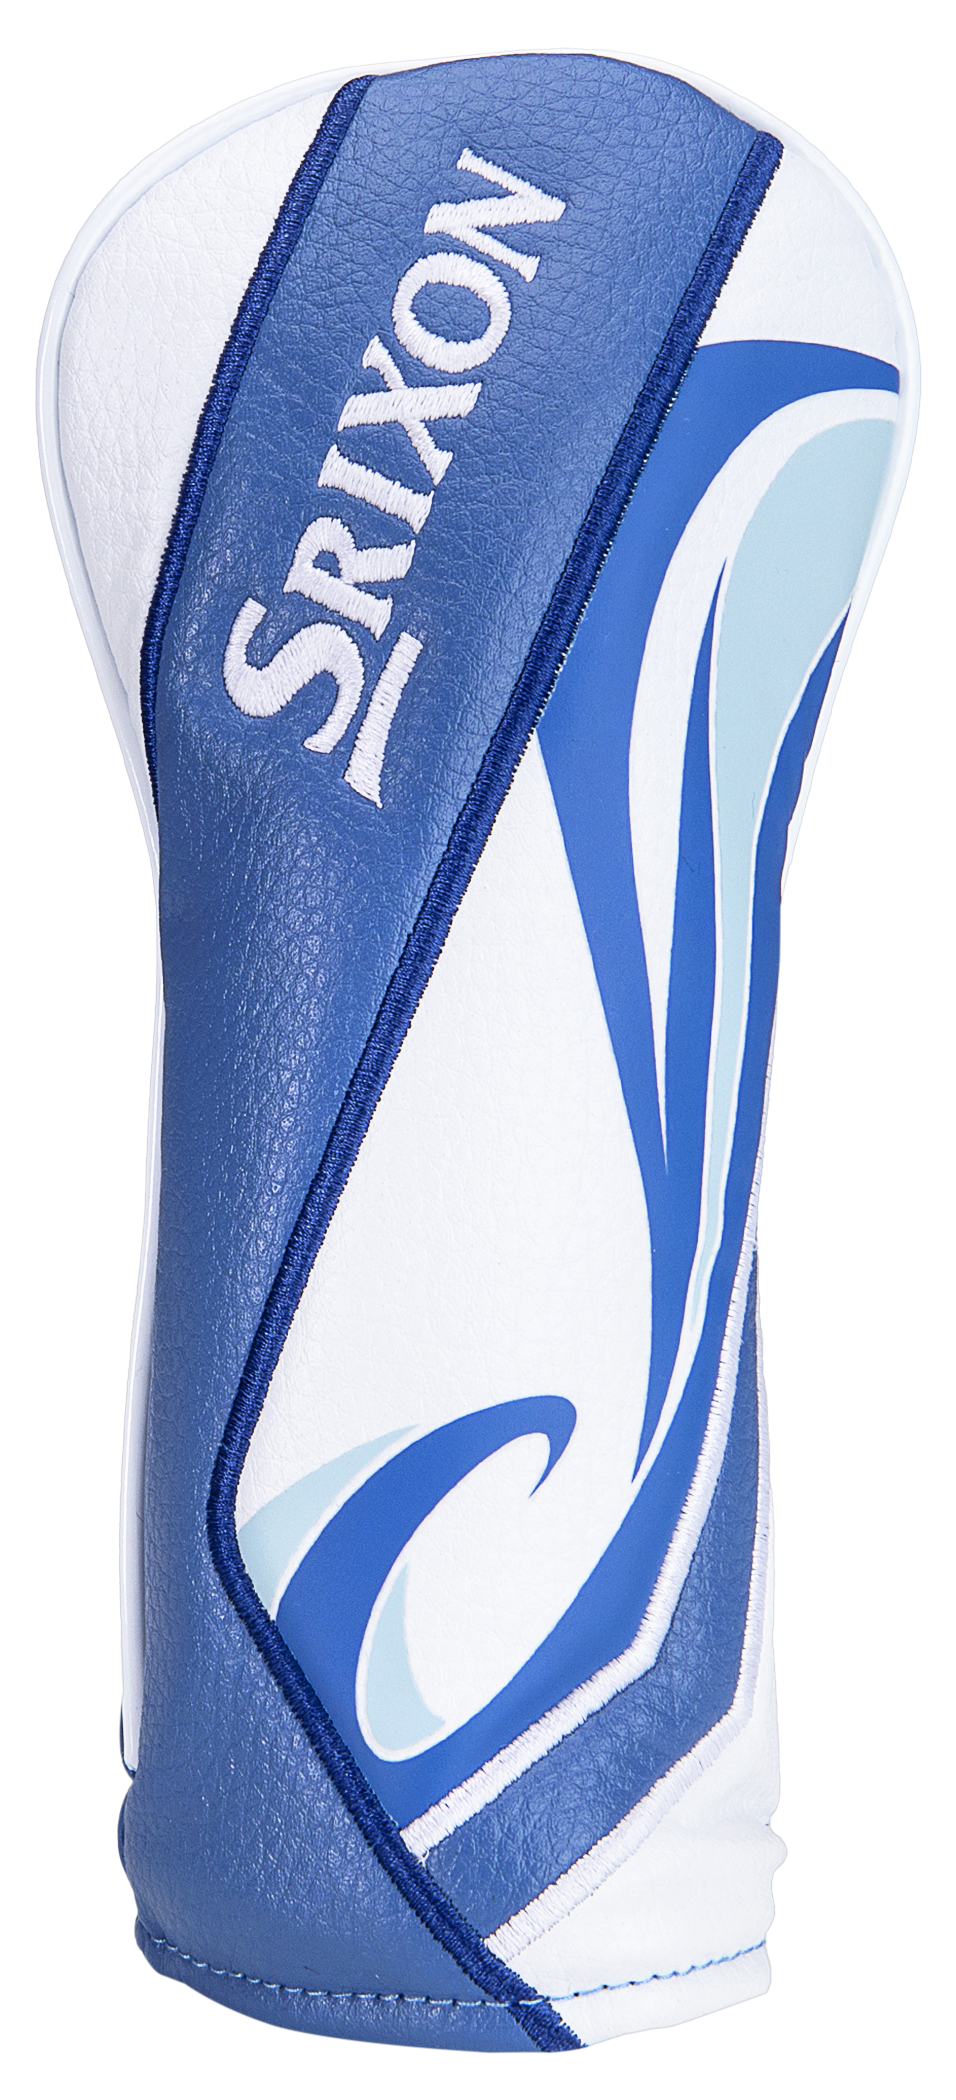 Limited Edition British Open Headcovers